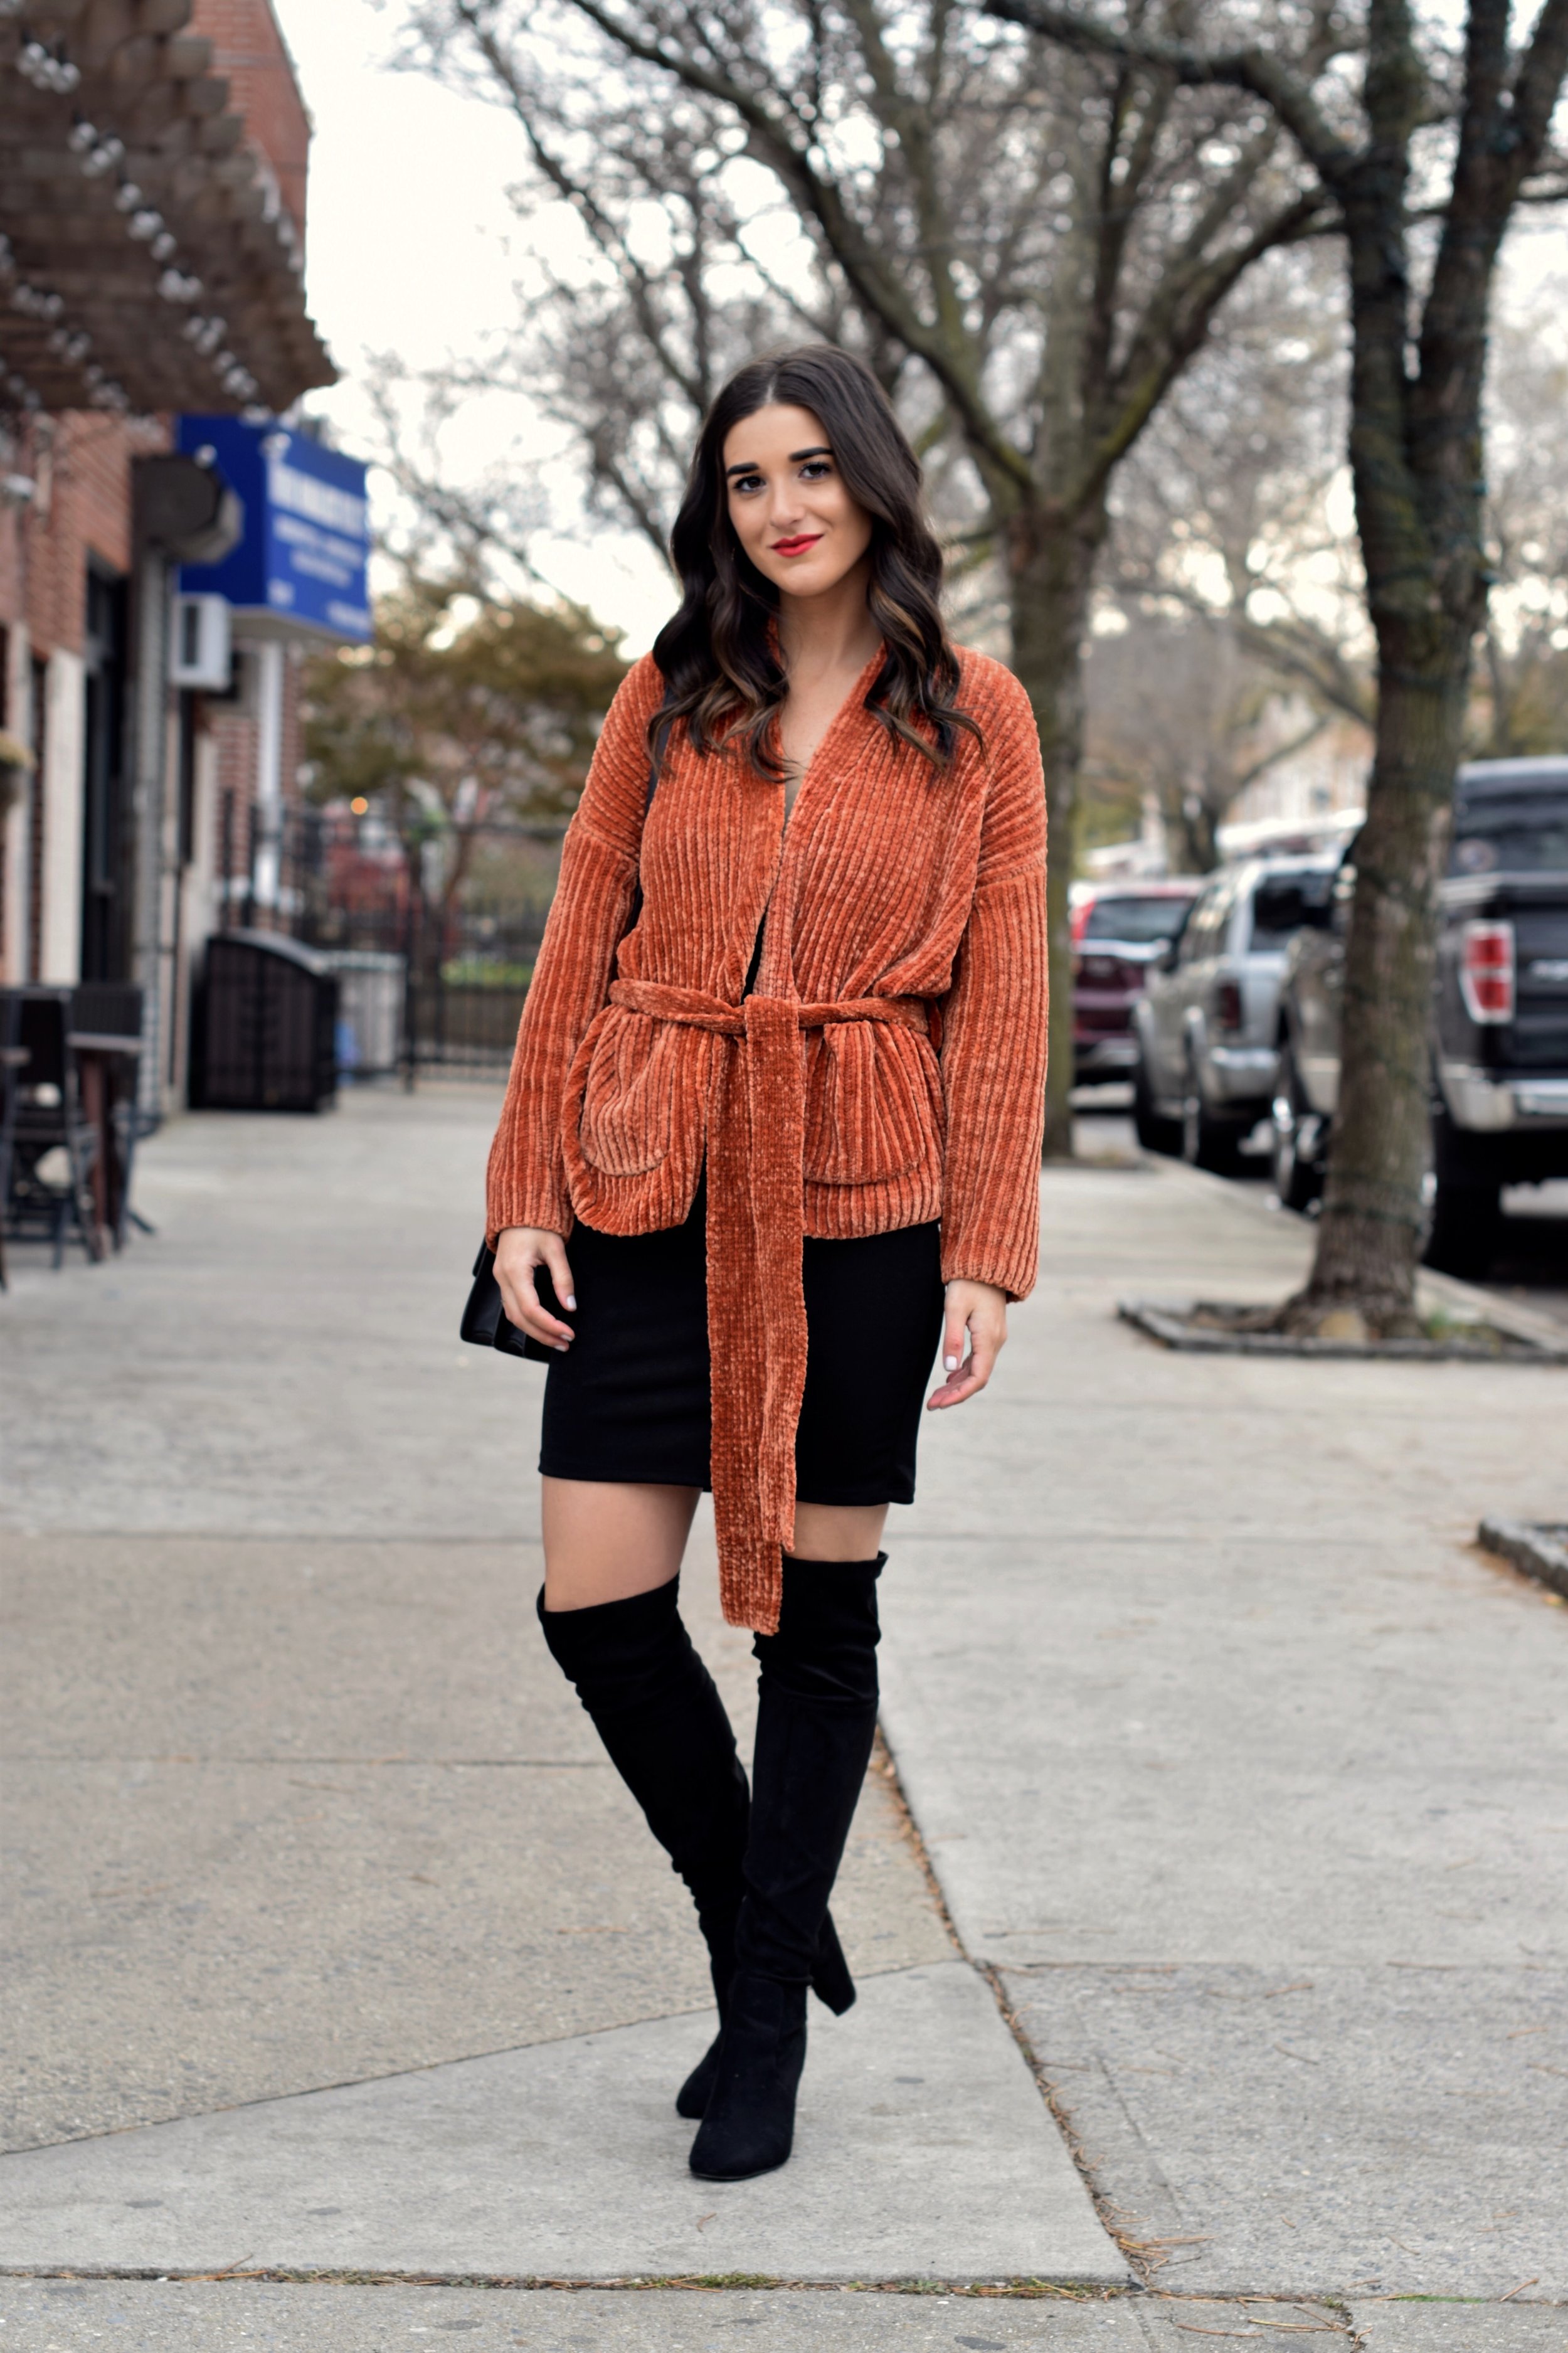 Orange Tie Sweater OTK Boots 10 Sweaters That Make The Perfect Holiday Gifts Esther Santer Fashion Blog NYC Street Style Blogger Outfit OOTD Trendy Urban Outfitters Girl Women Black Over The Knee Boots Slip Dress Beautiful New York City  Cozy OOTD.jpg